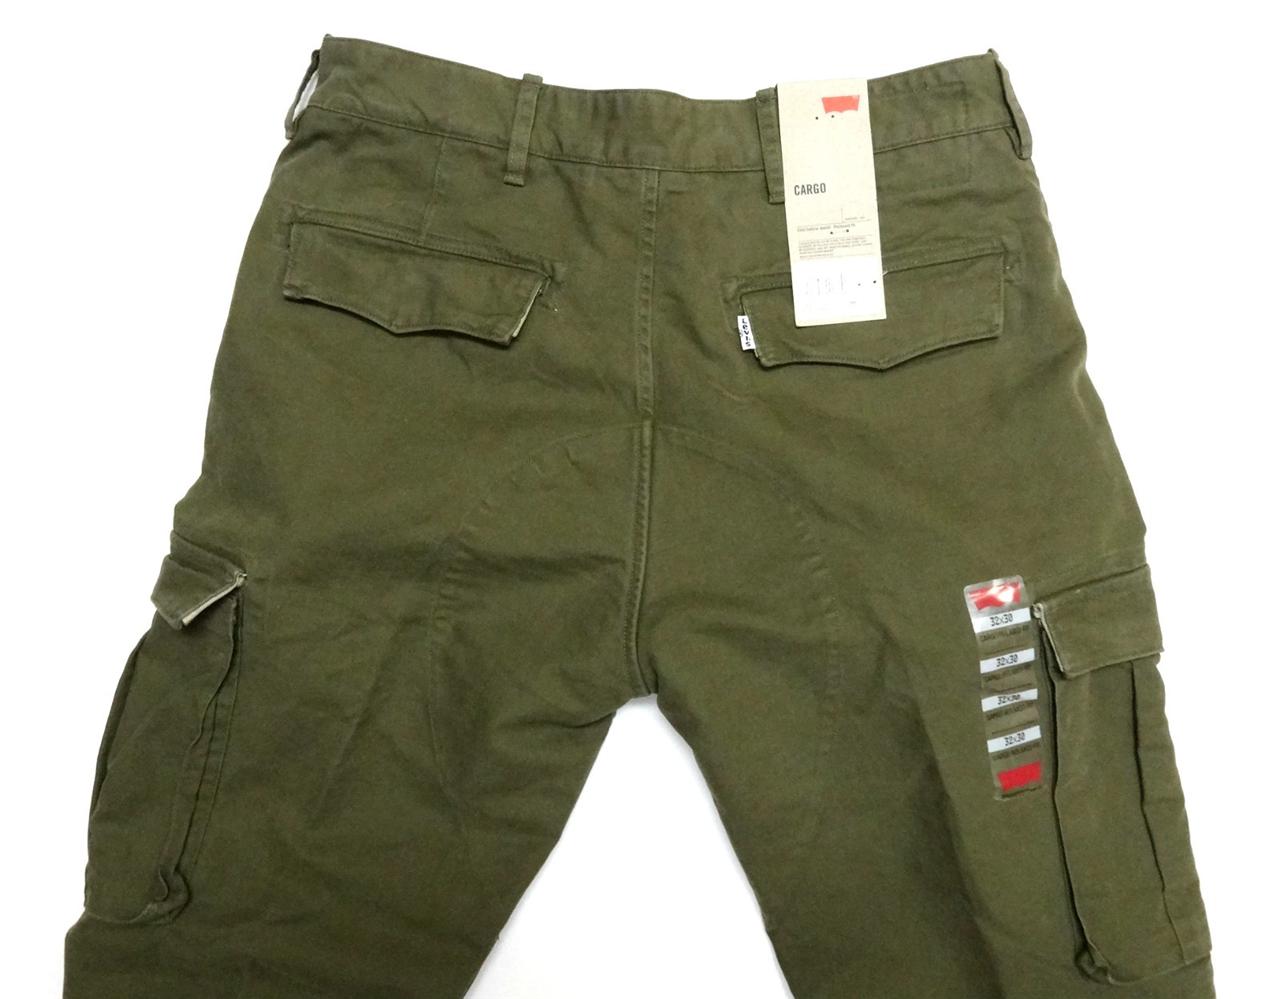 Levi's $88 Men's Relaxed Fit Cargo Pants Ivy Green #0004